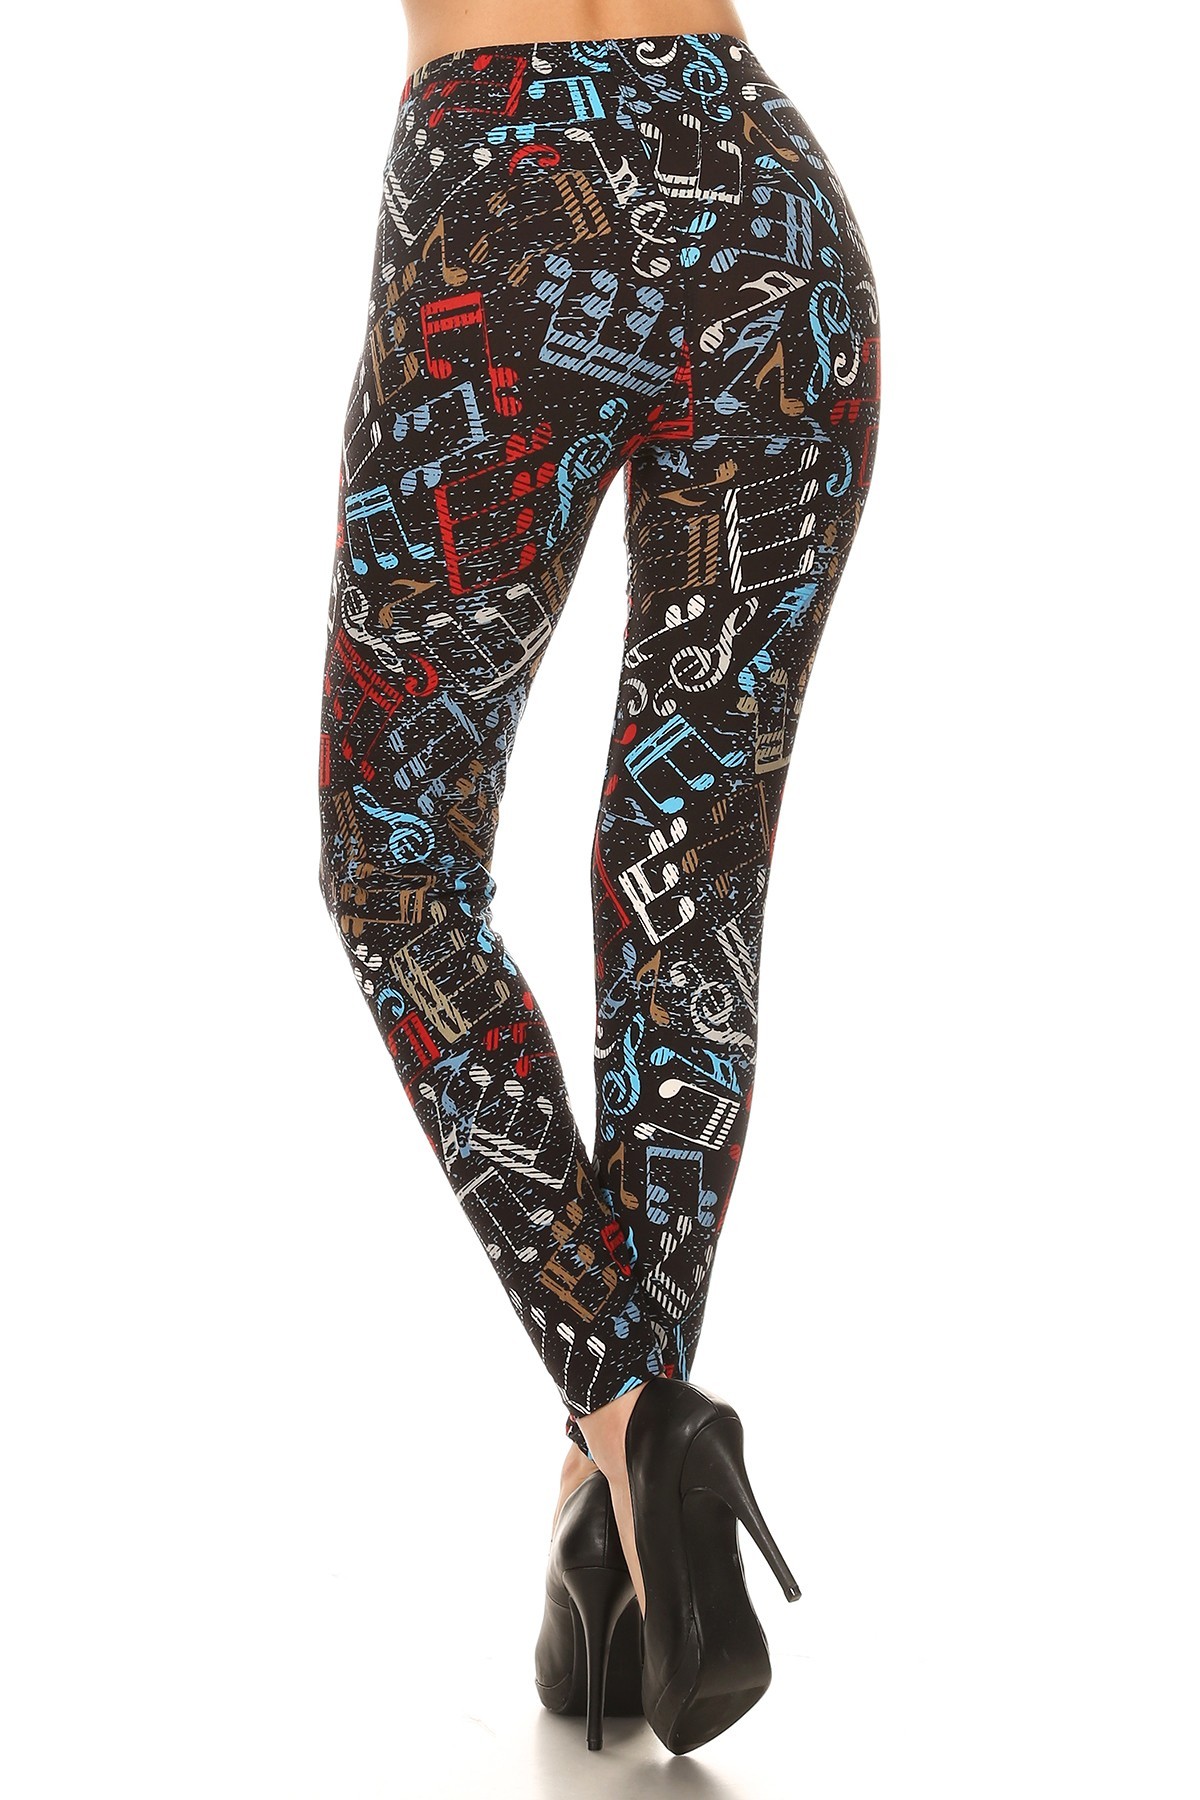 Wholesale Buttery Smooth Colorful Music Note Extra Plus Size Leggings - 3X-5X